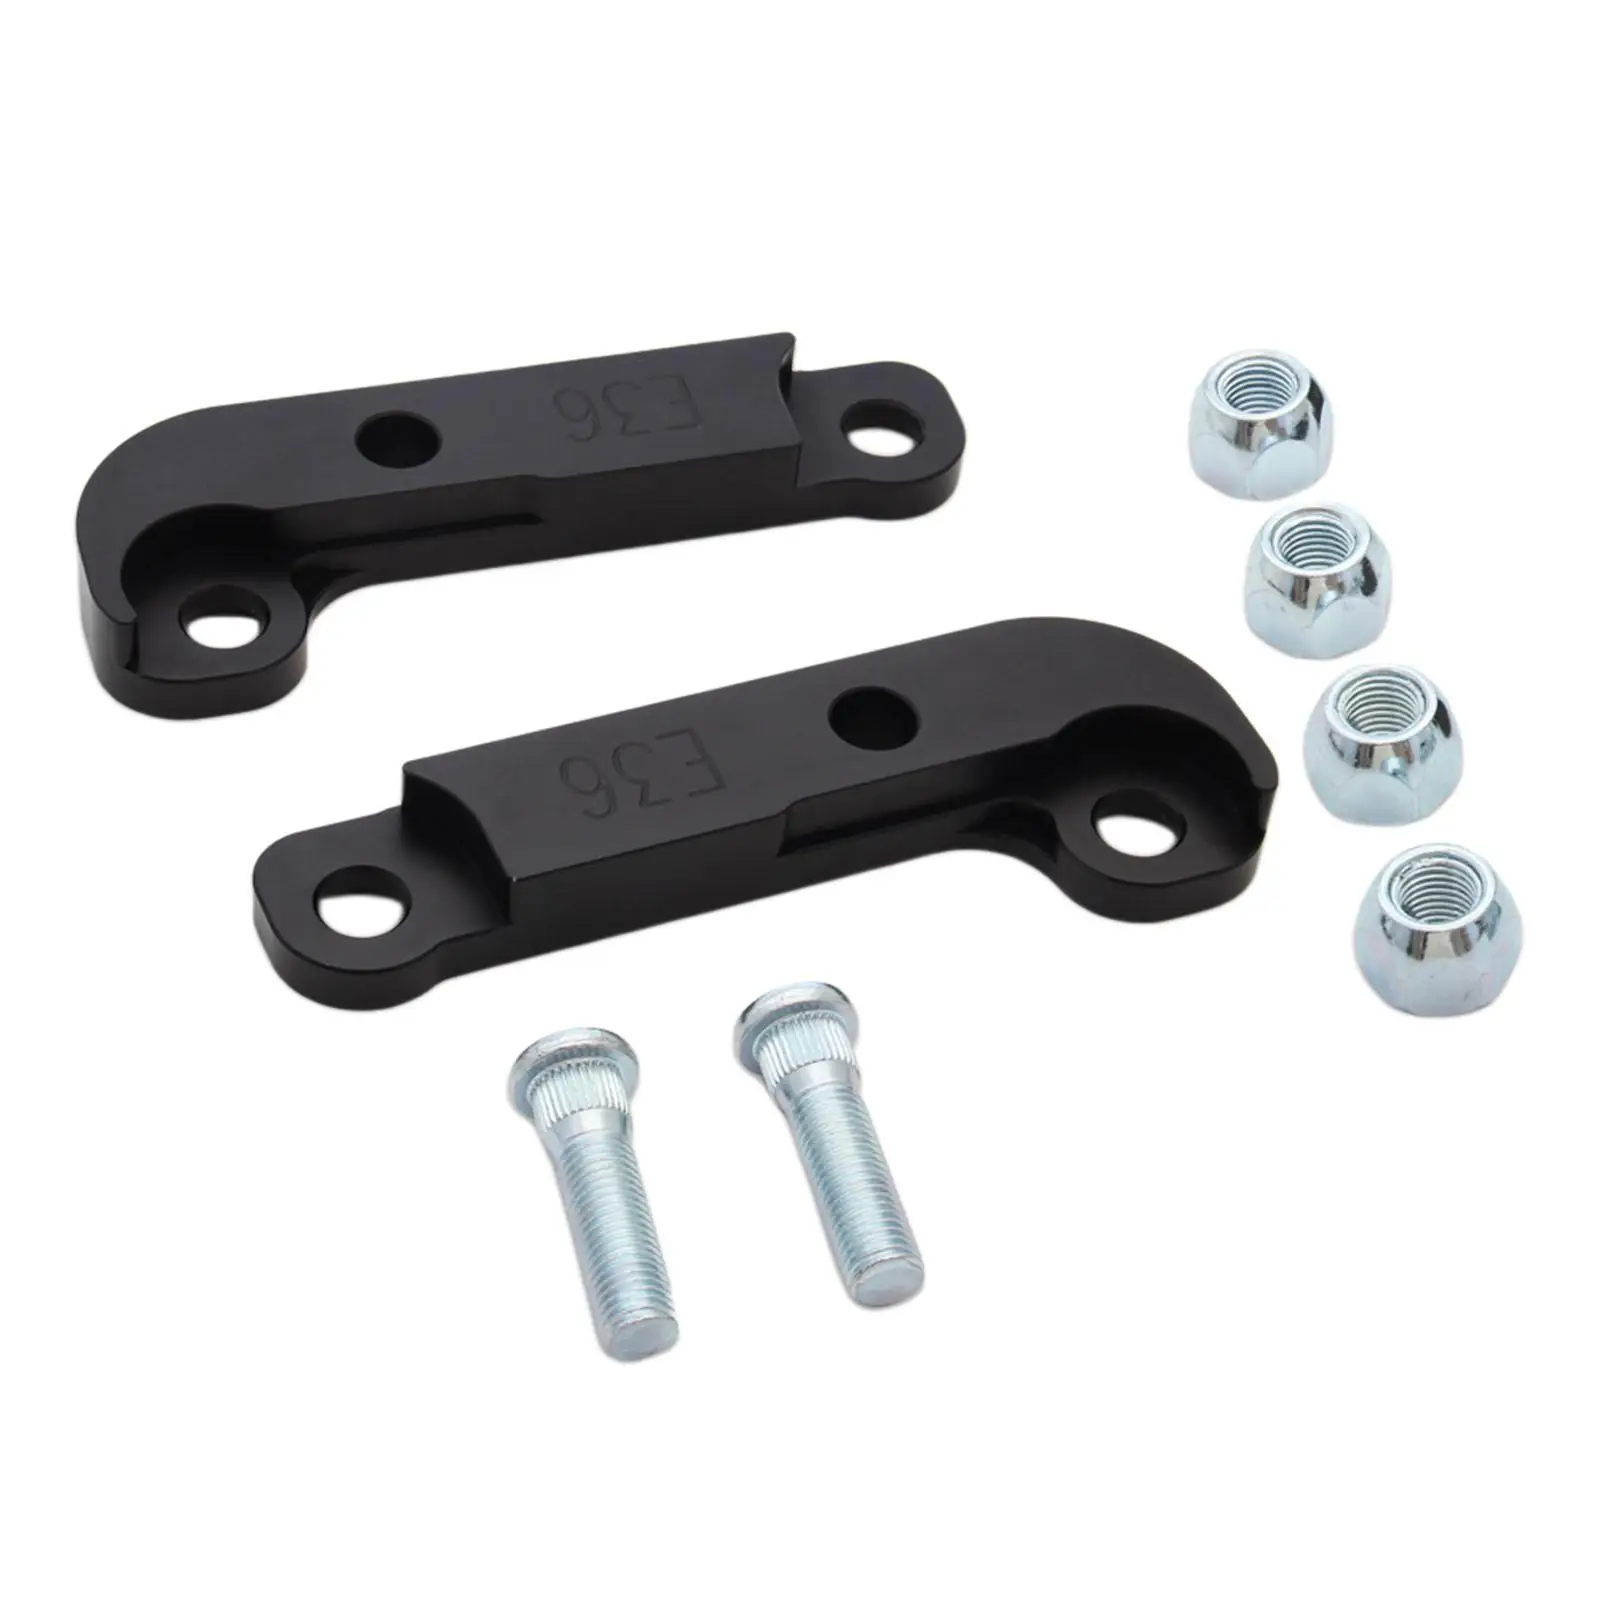 Turn Angles Adapter Increasing Turn Angle 25% with Mounting Aluminium Drift Lock Adapter for  E36 M3 Replaces